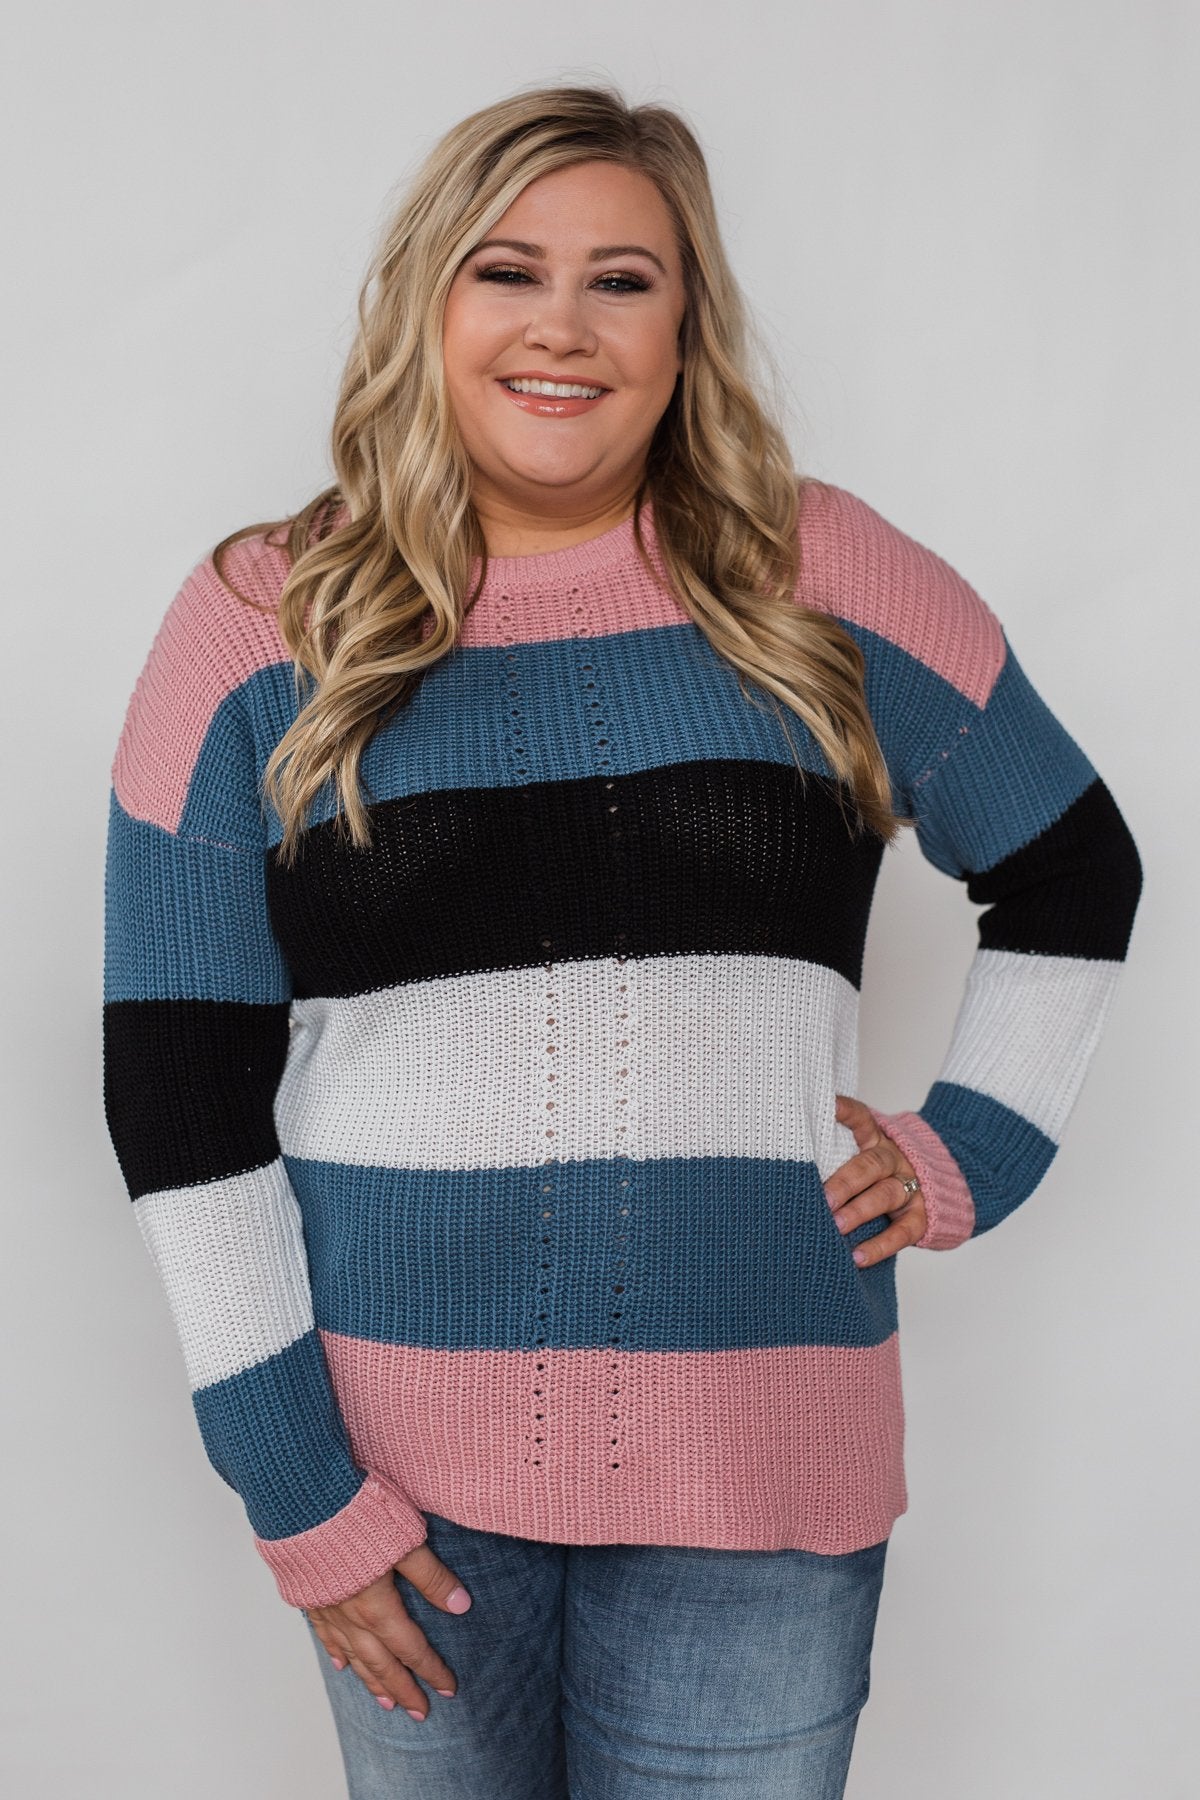 The Way to You Knitted Sweater - Rose, Teal, & Black